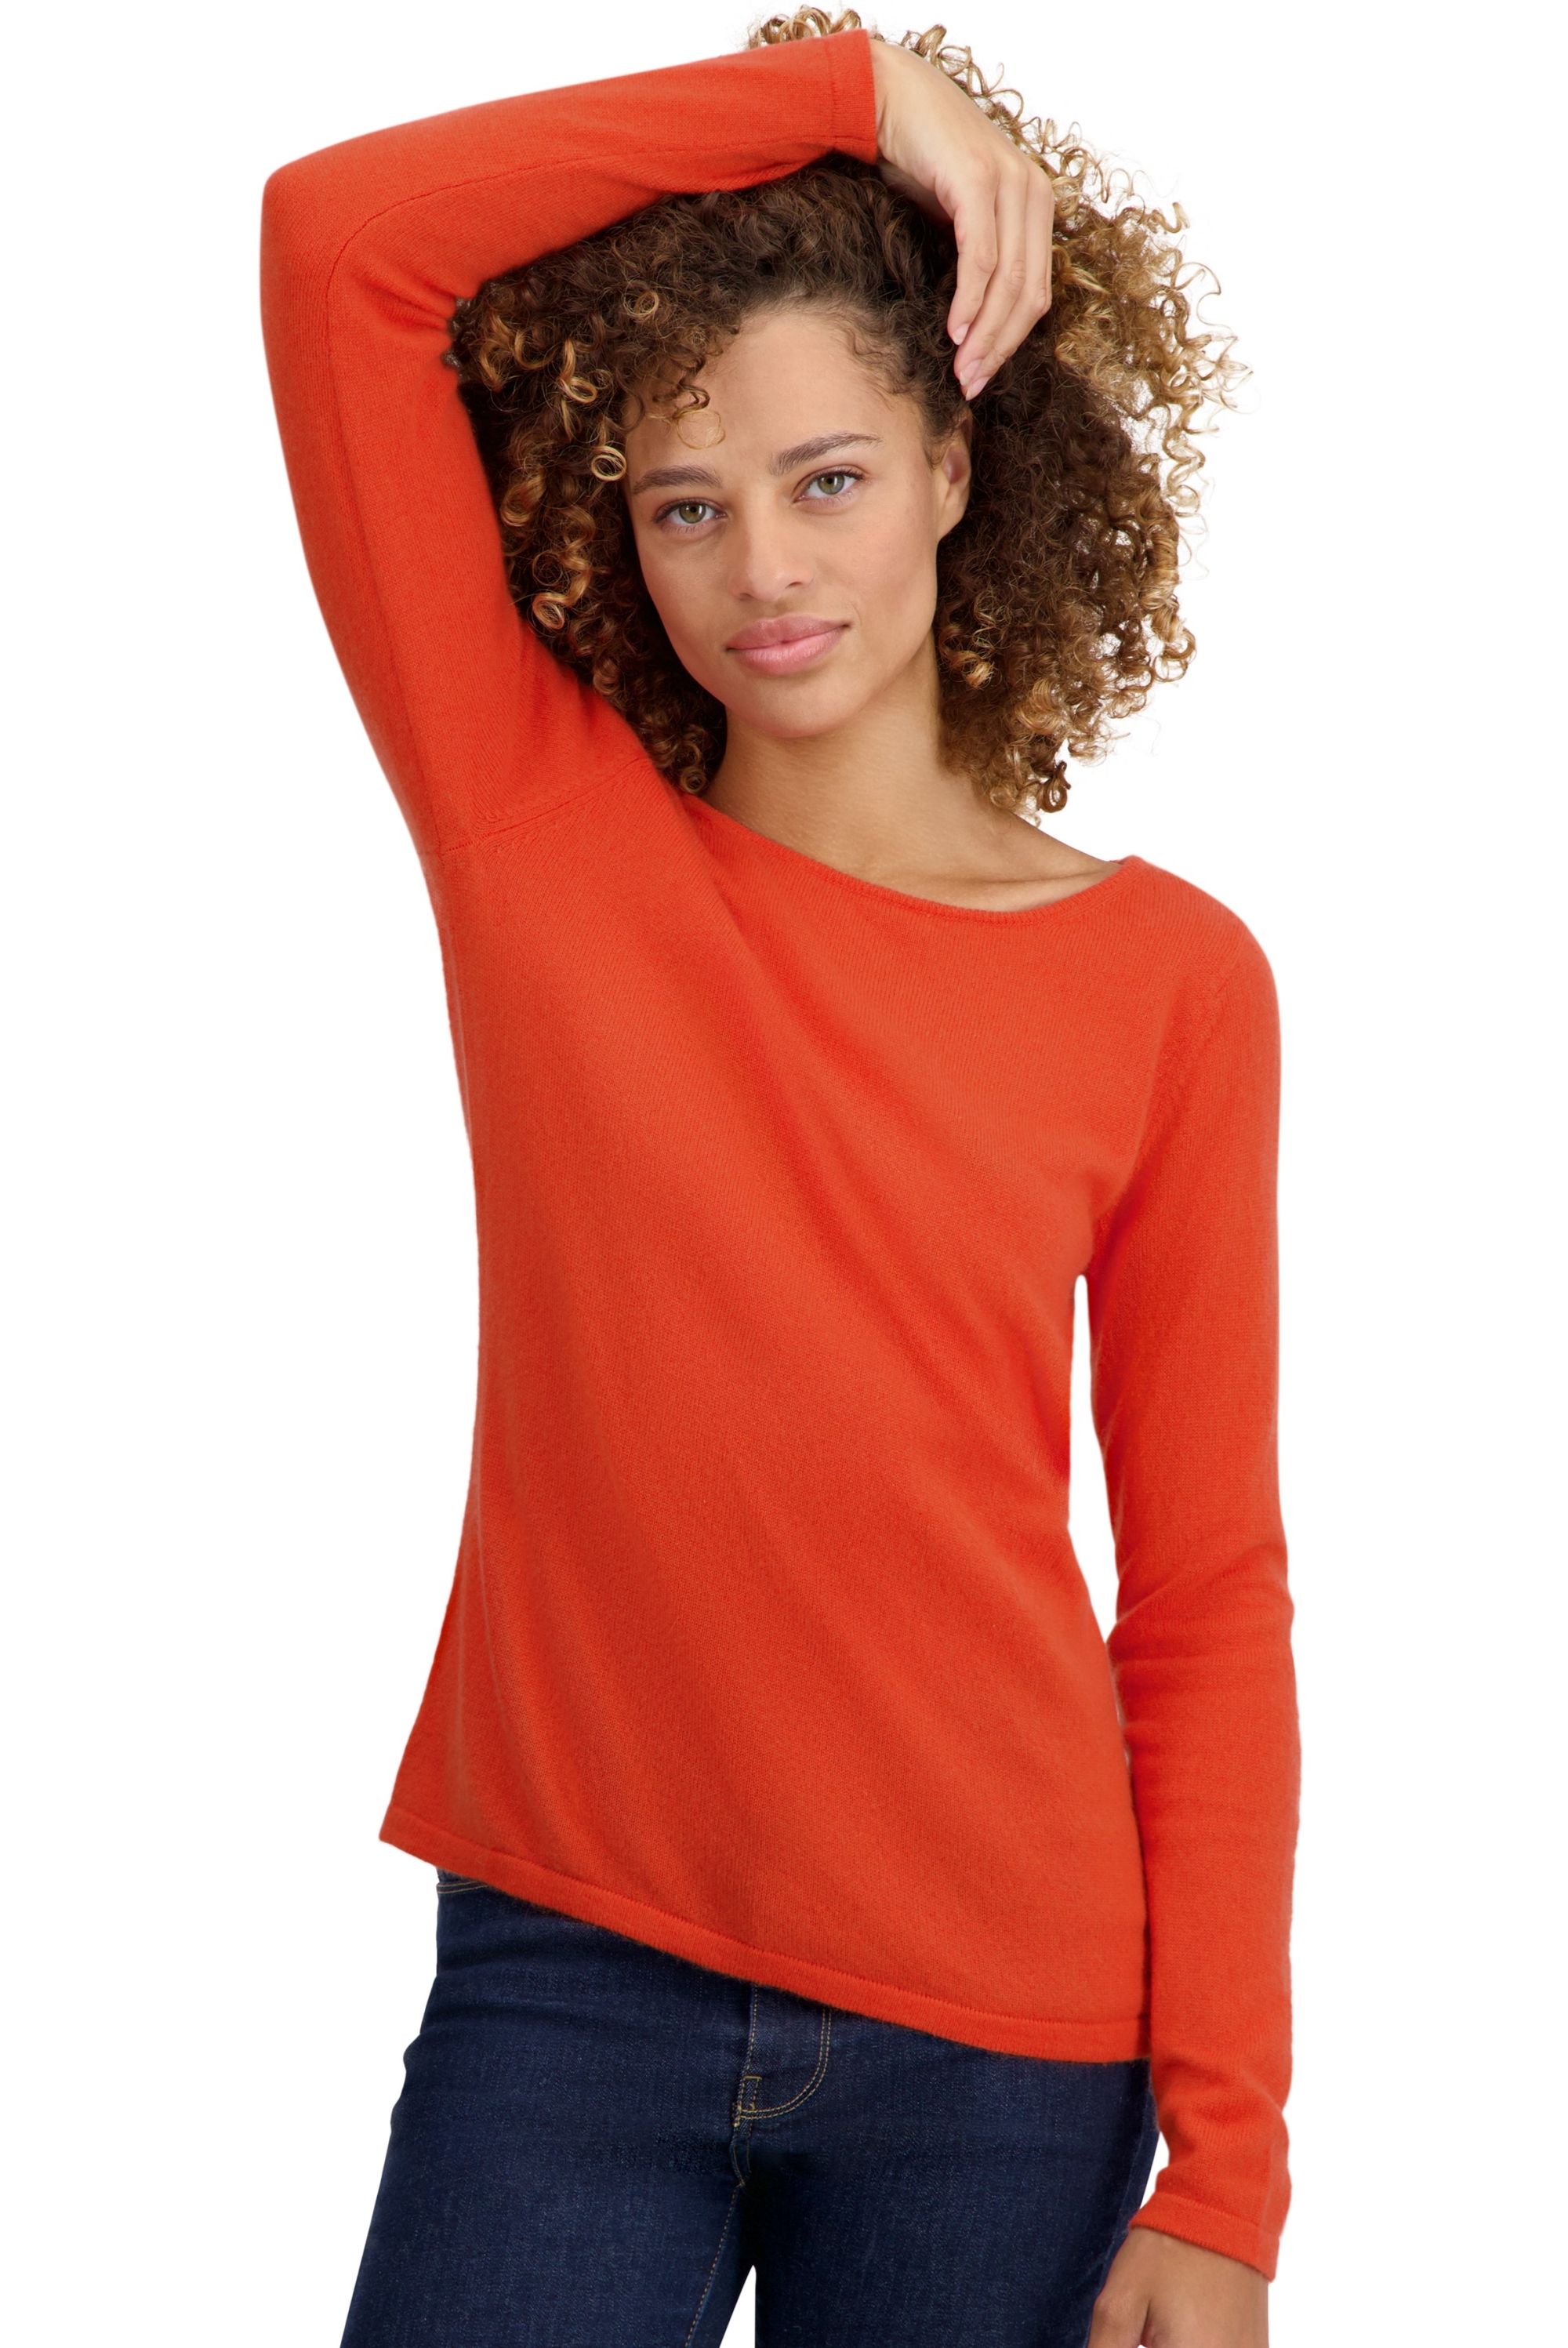 Cashmere ladies basic sweaters at low prices tennessy first satsuma l